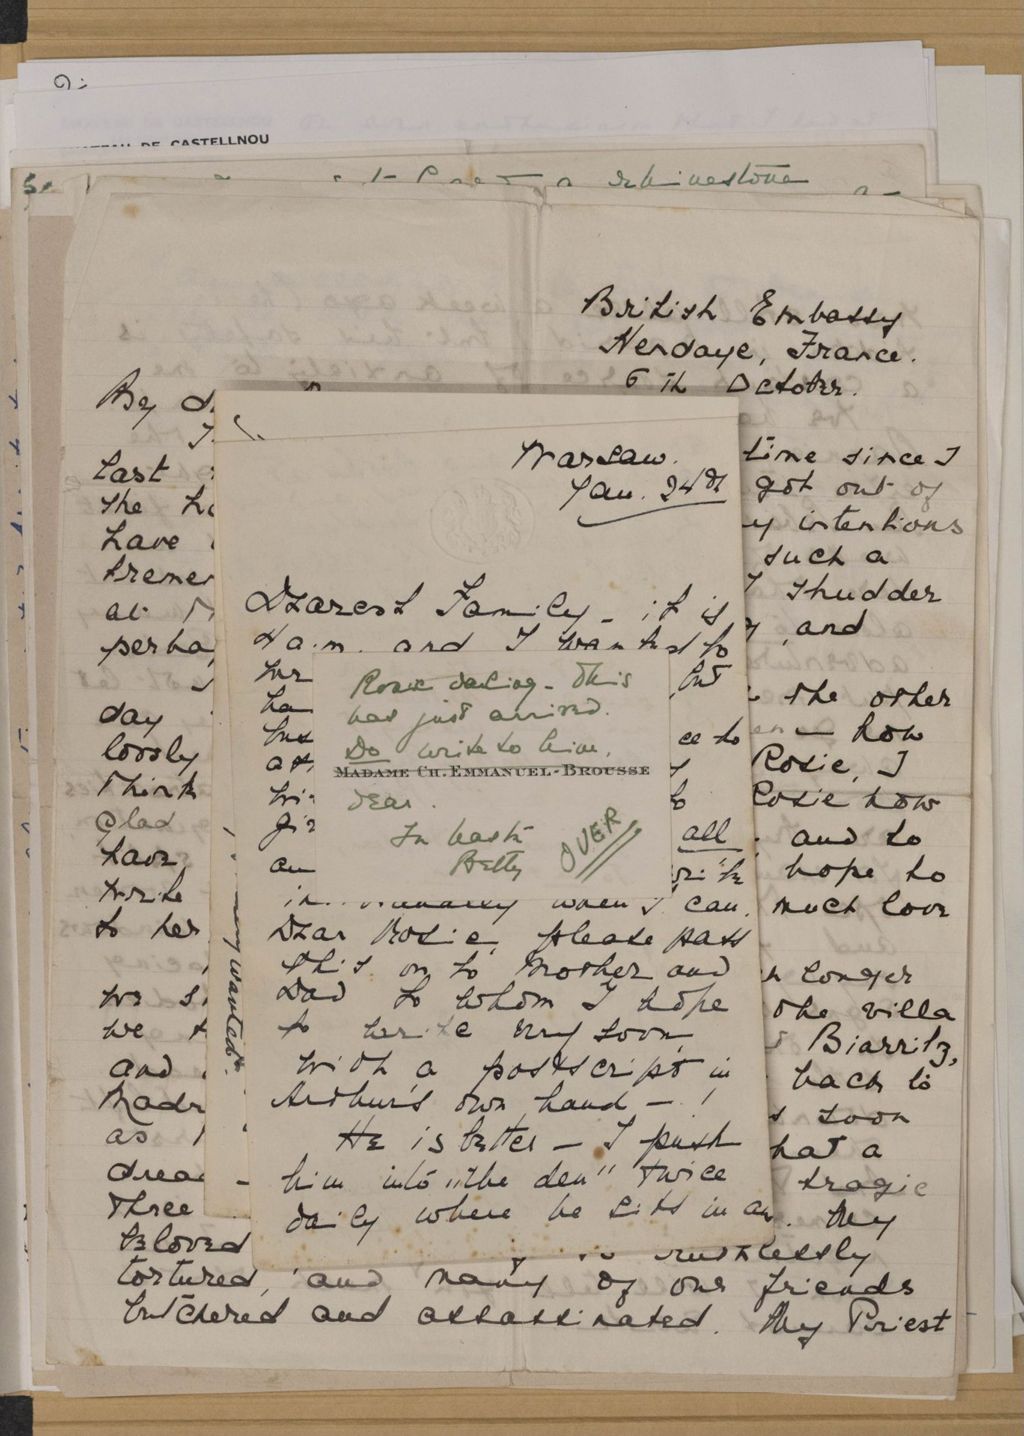 Miniature of Letters from Elizabeth "Betty" Pack